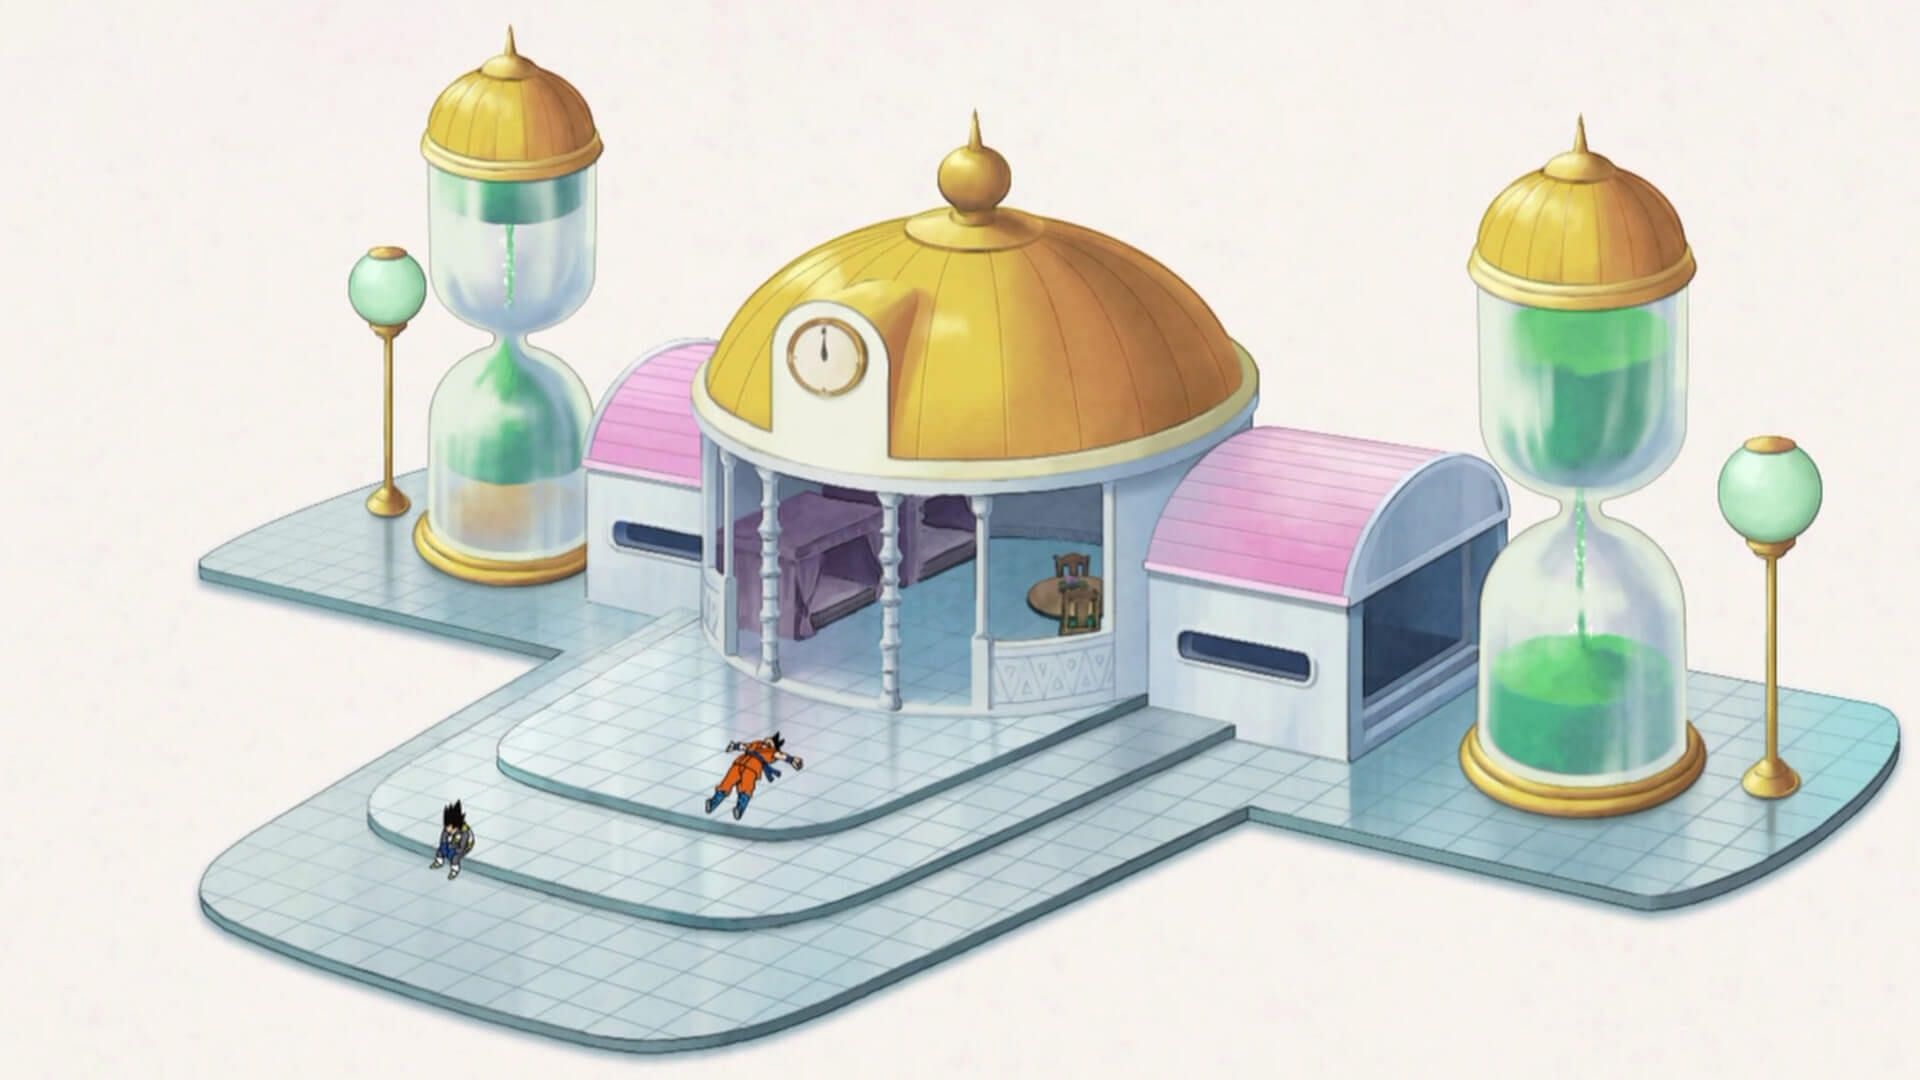 Hyperbolic Time Chamber as seen in the Dragon Ball Z anime (Image via Toei Animation)